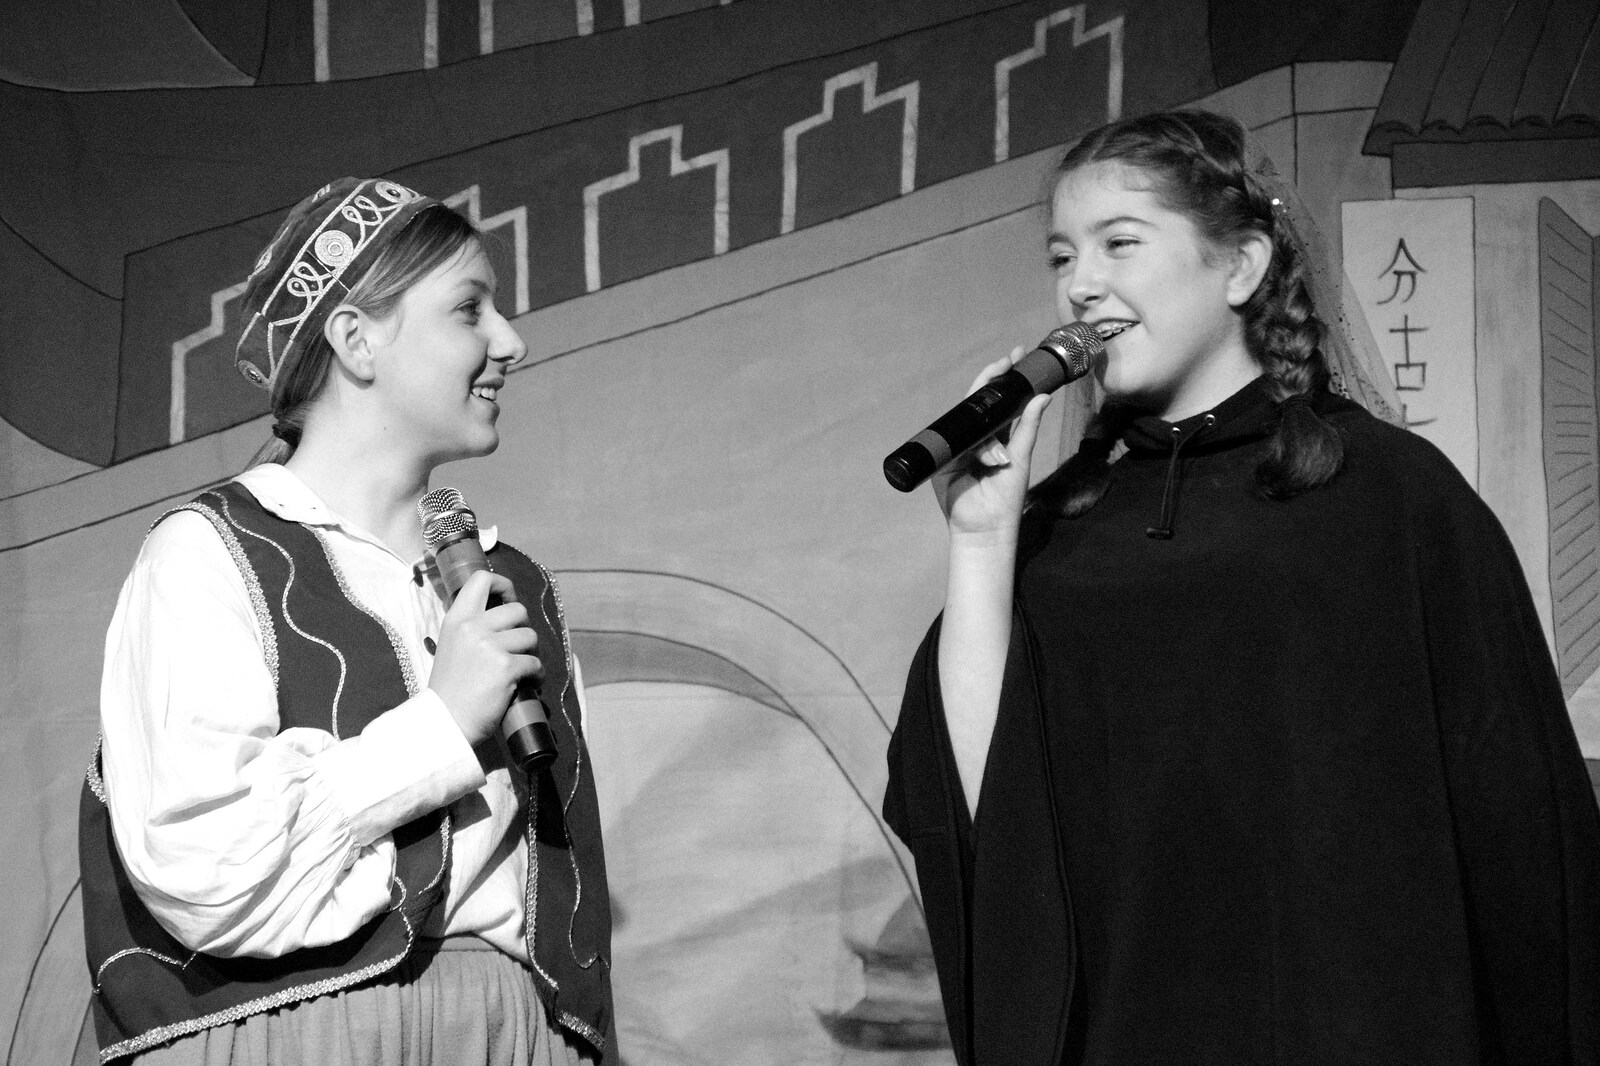 Soph and Millie as Aladdin and the princess from Dove Players do Aladdin, Eye, Suffolk - 10th December 2022